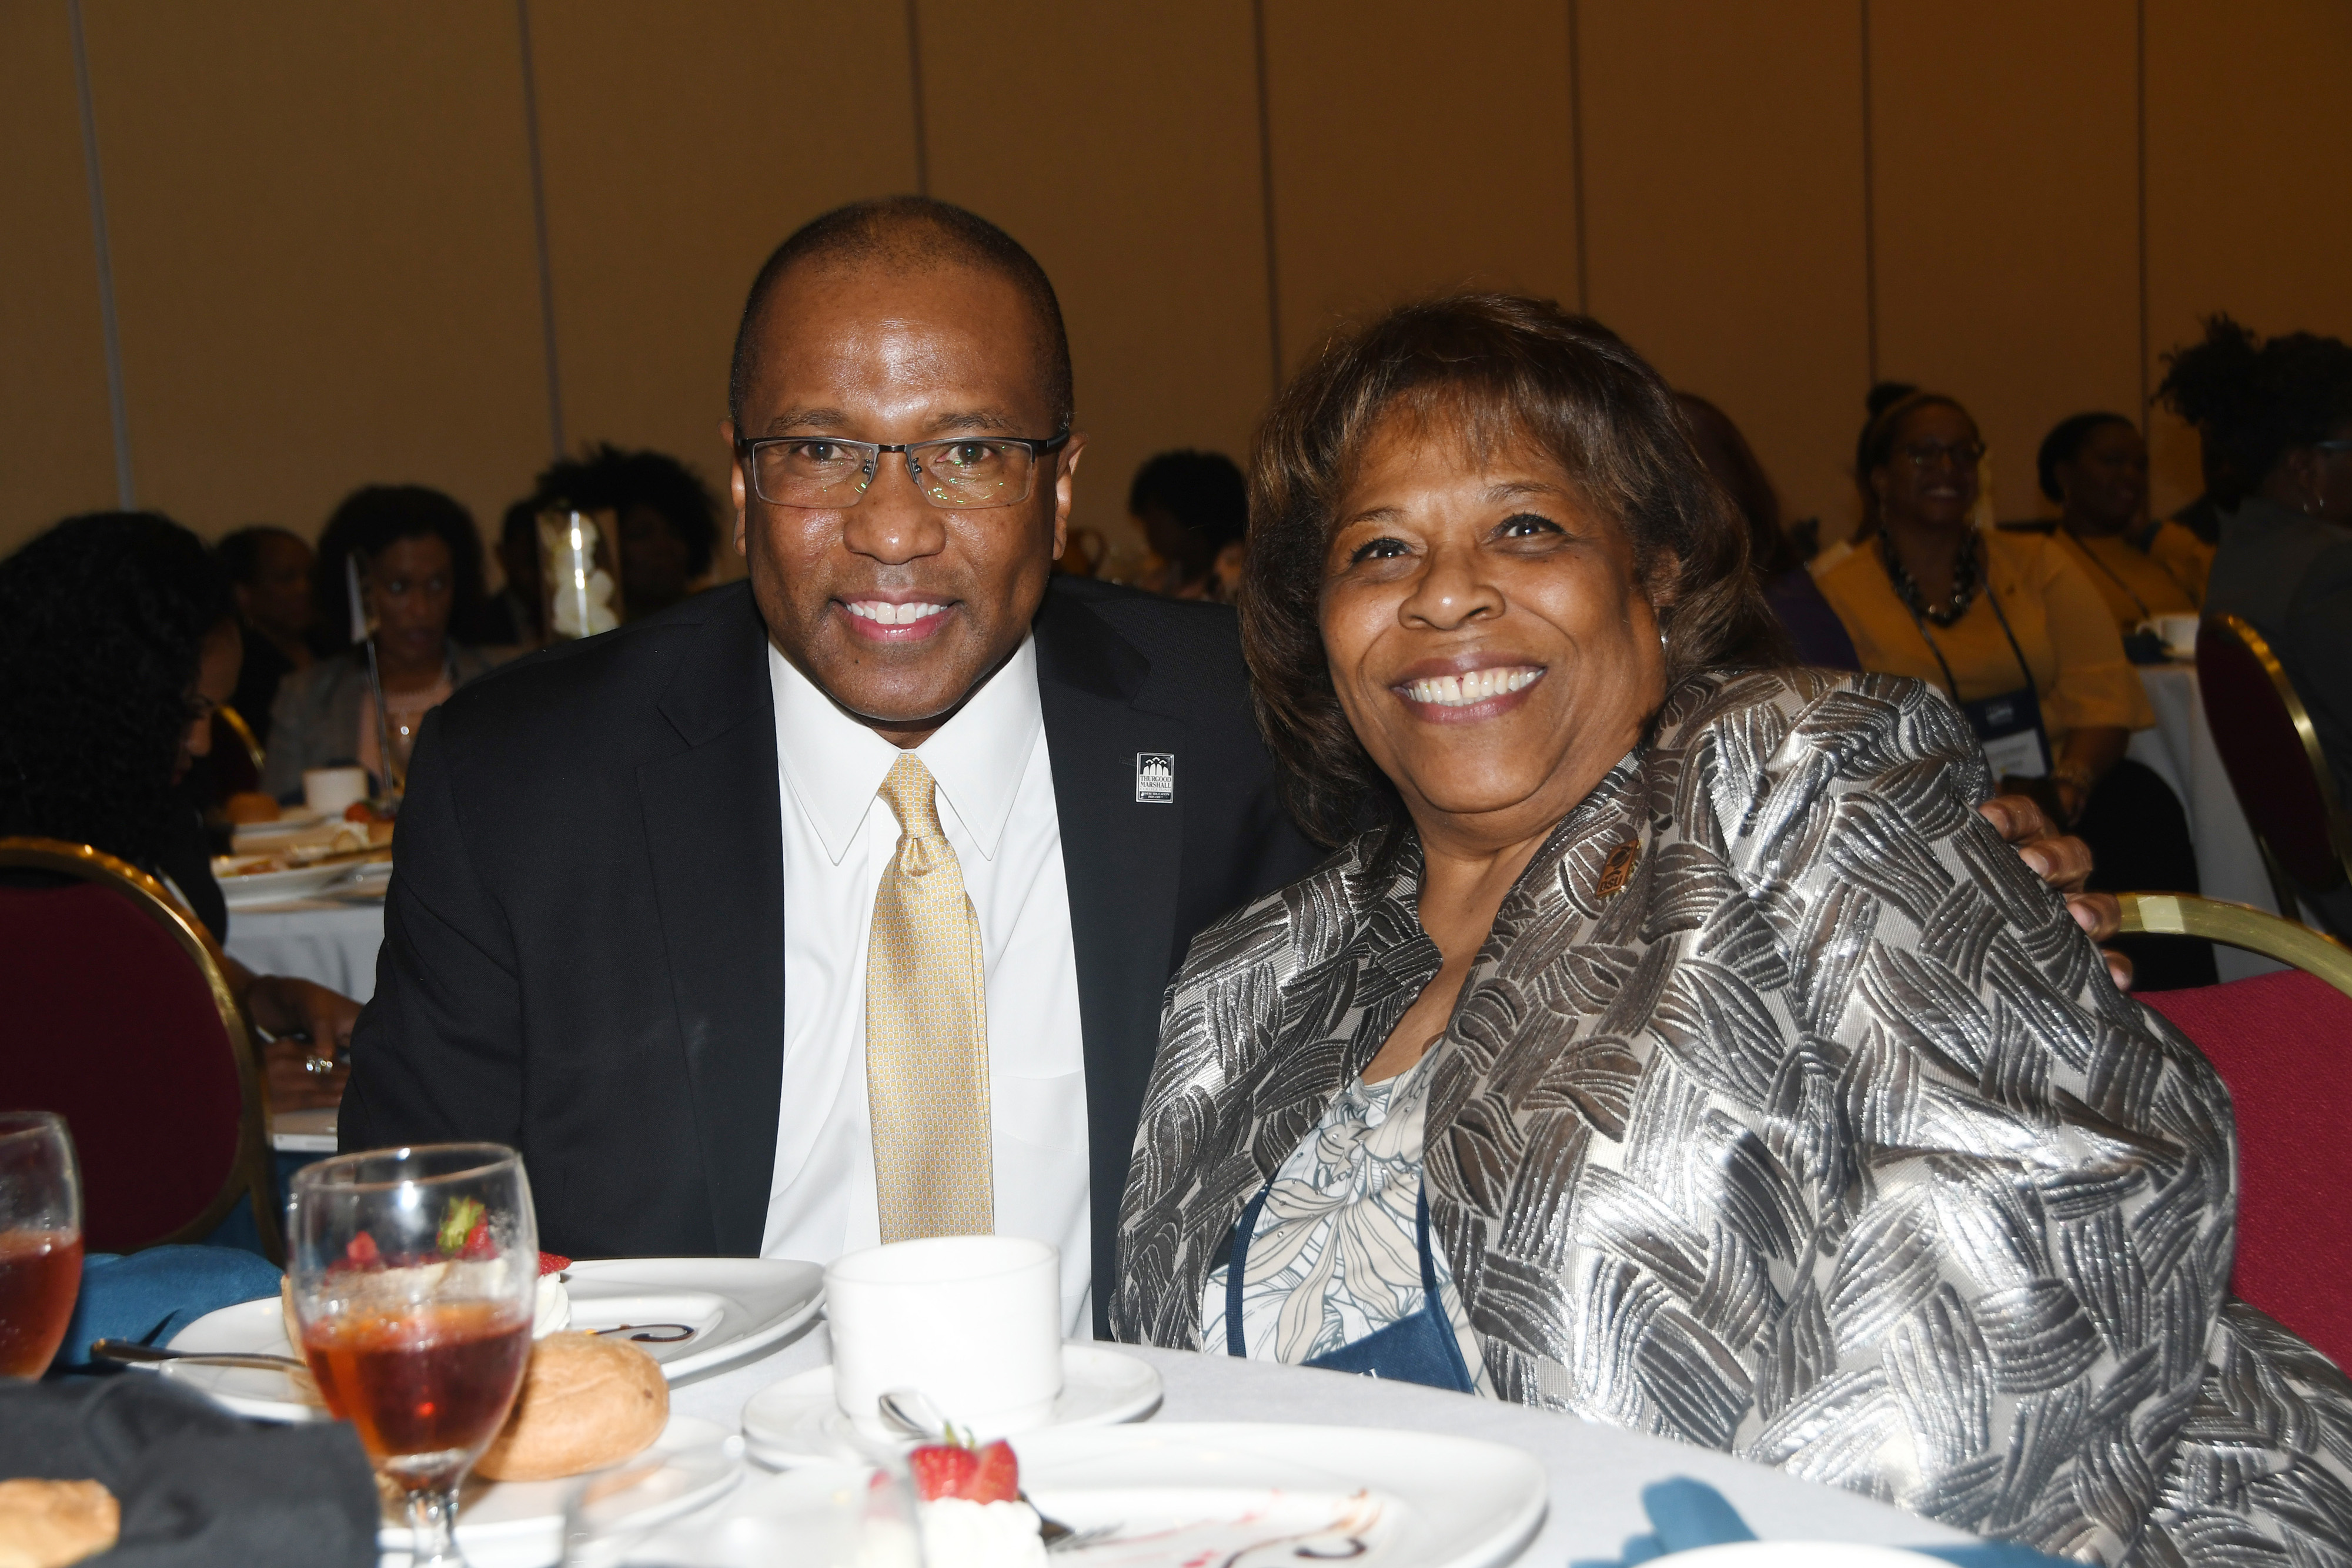 Dr. Harry L. Williams is reunited with his successor current DSU President Wilma Mishoe at the HBCU Philanthropy Symposium. Dr. Williams -- president of DSU from 2010 to 2017 -- attended to give an address in his current capacity as the executive president and CEO of the Thurgood Marshall College Fund